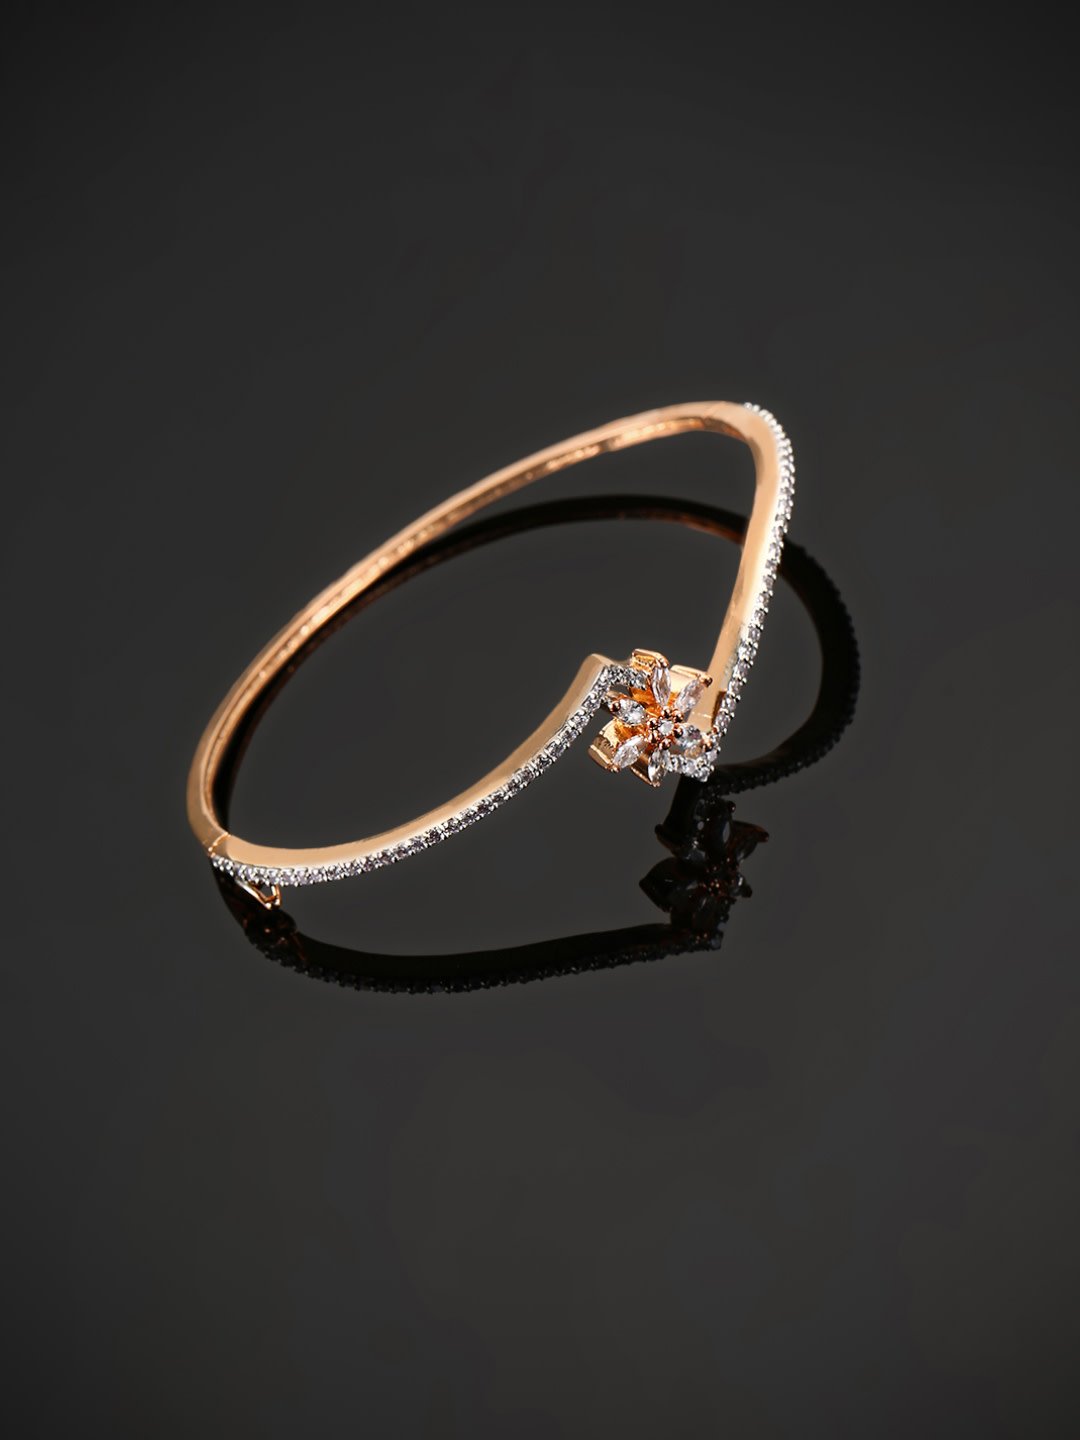 Women's Rose Gold-Plated American Diamond Studded Bracelet in Floral Pattern - Priyaasi